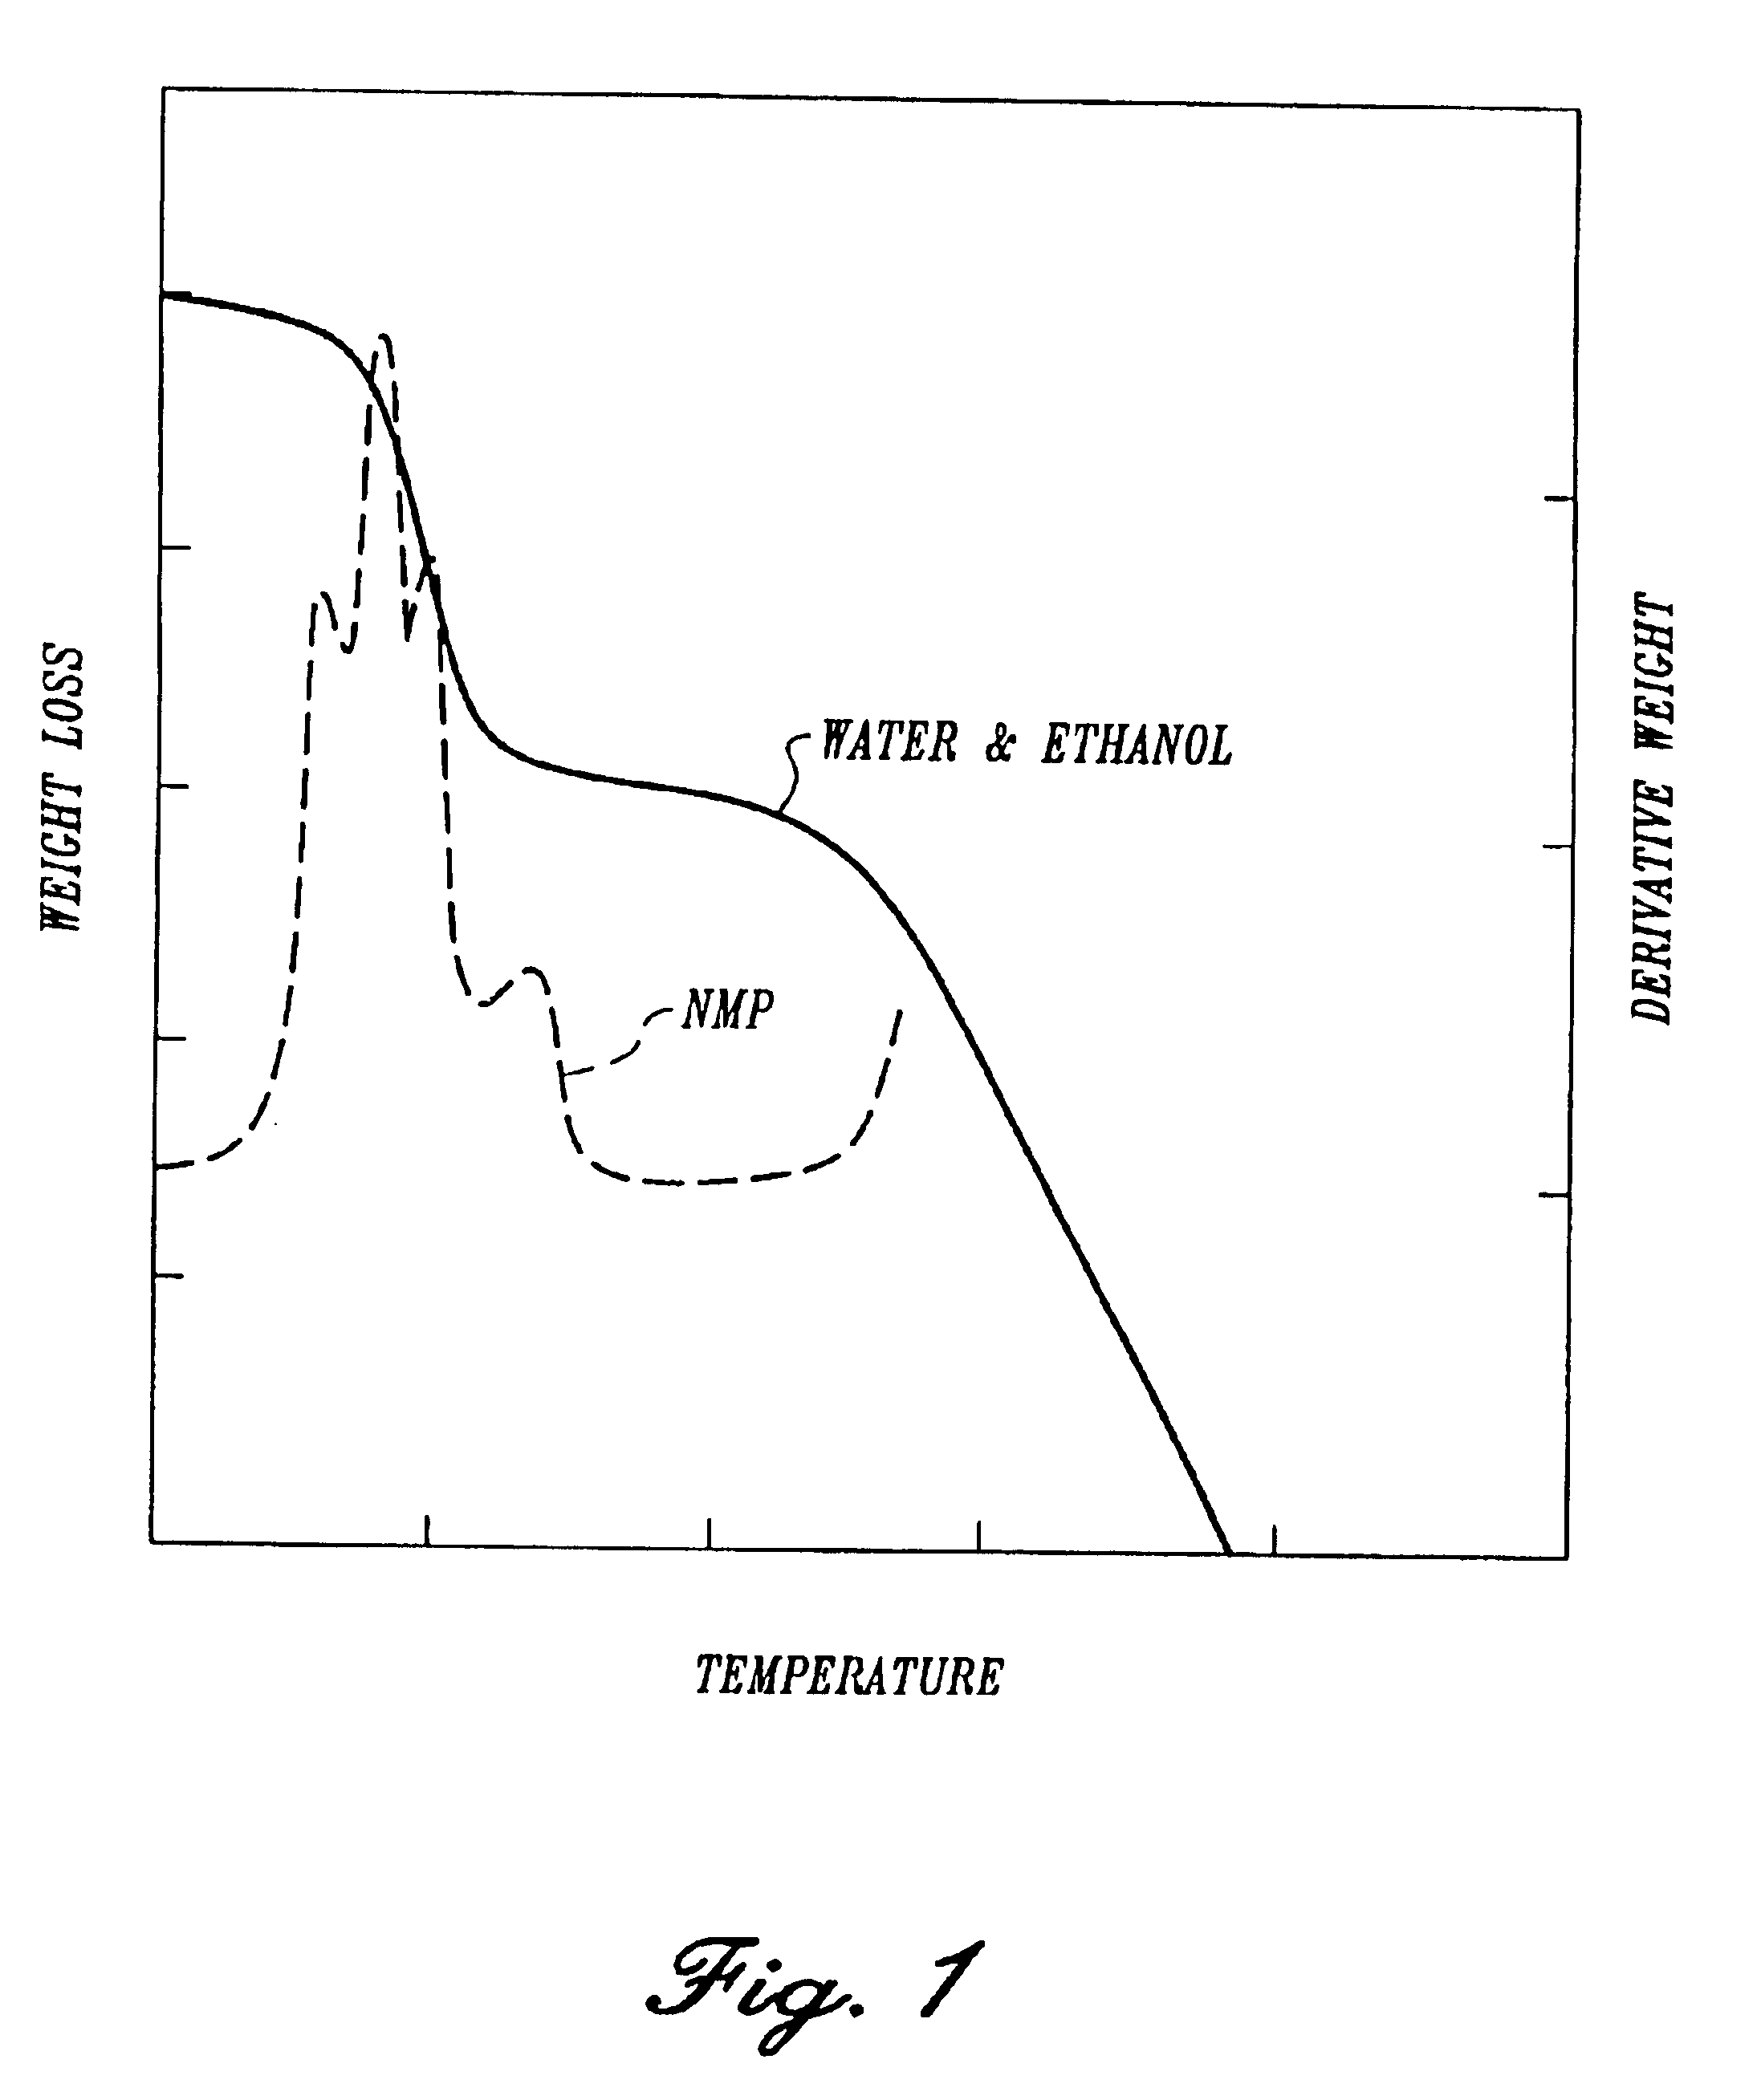 Method for forming composite parts from volatile-emitting materials using breathable tooling